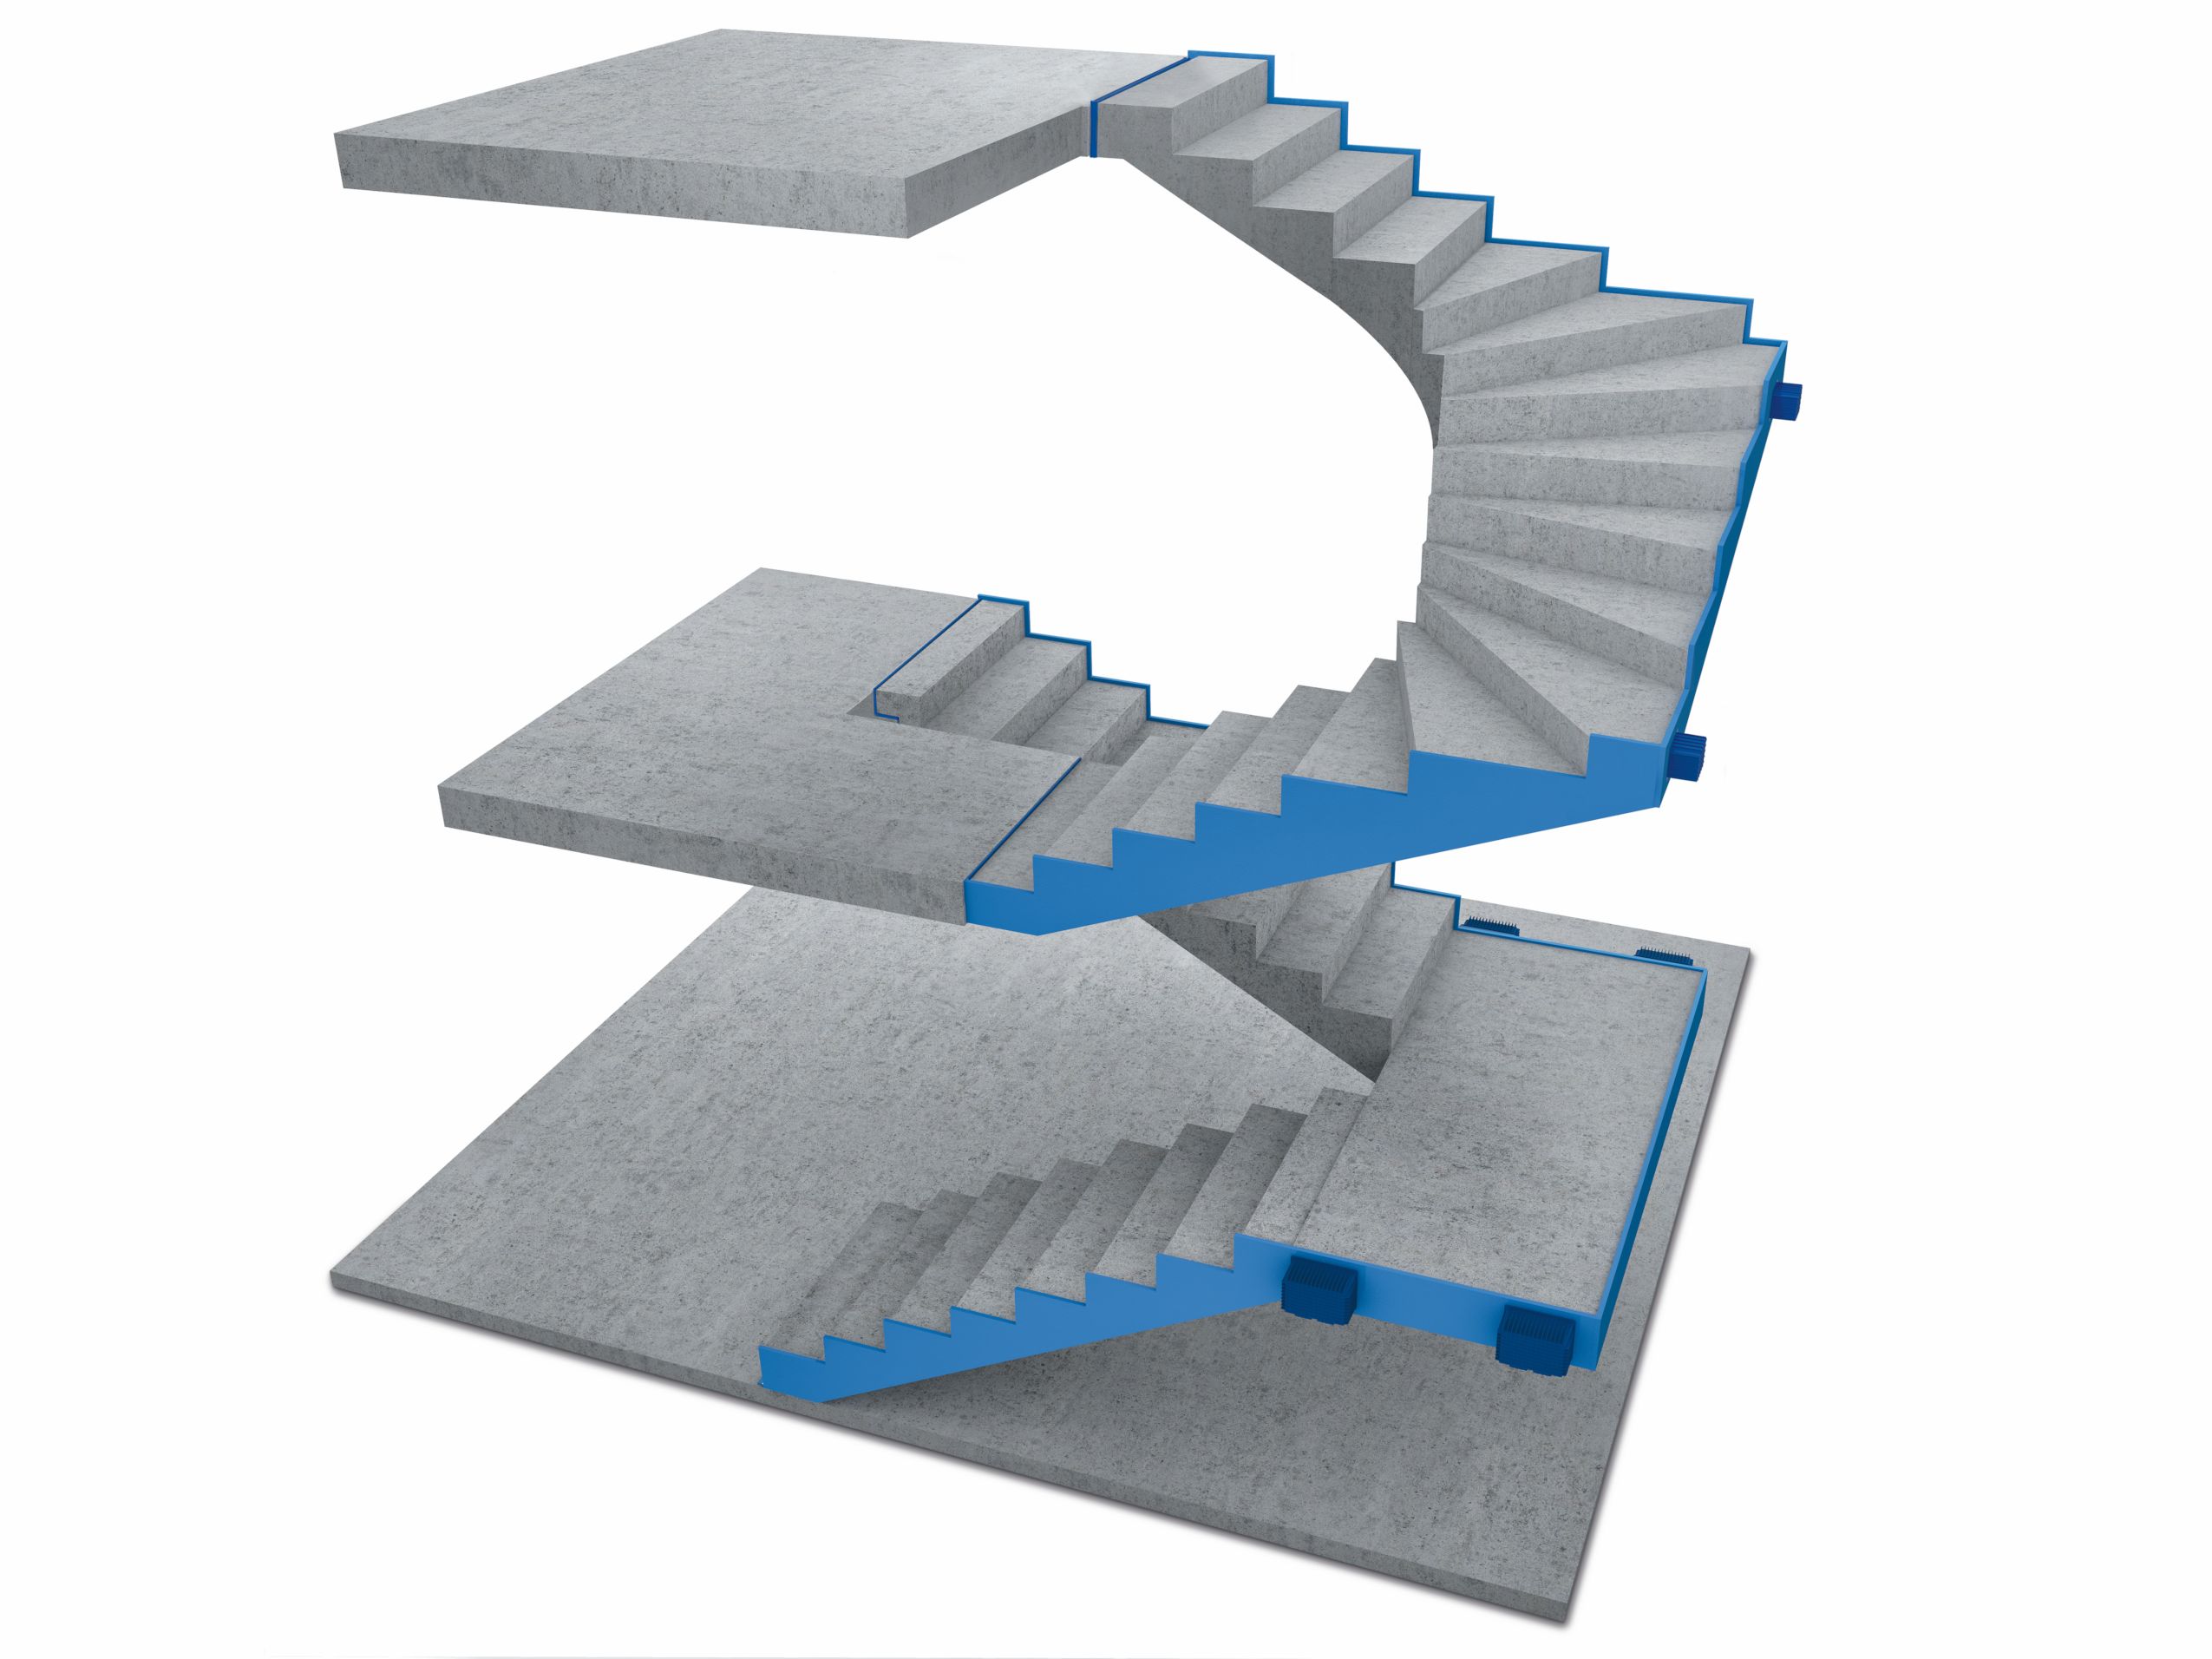 New staircase impact sound insulation system from Schöck